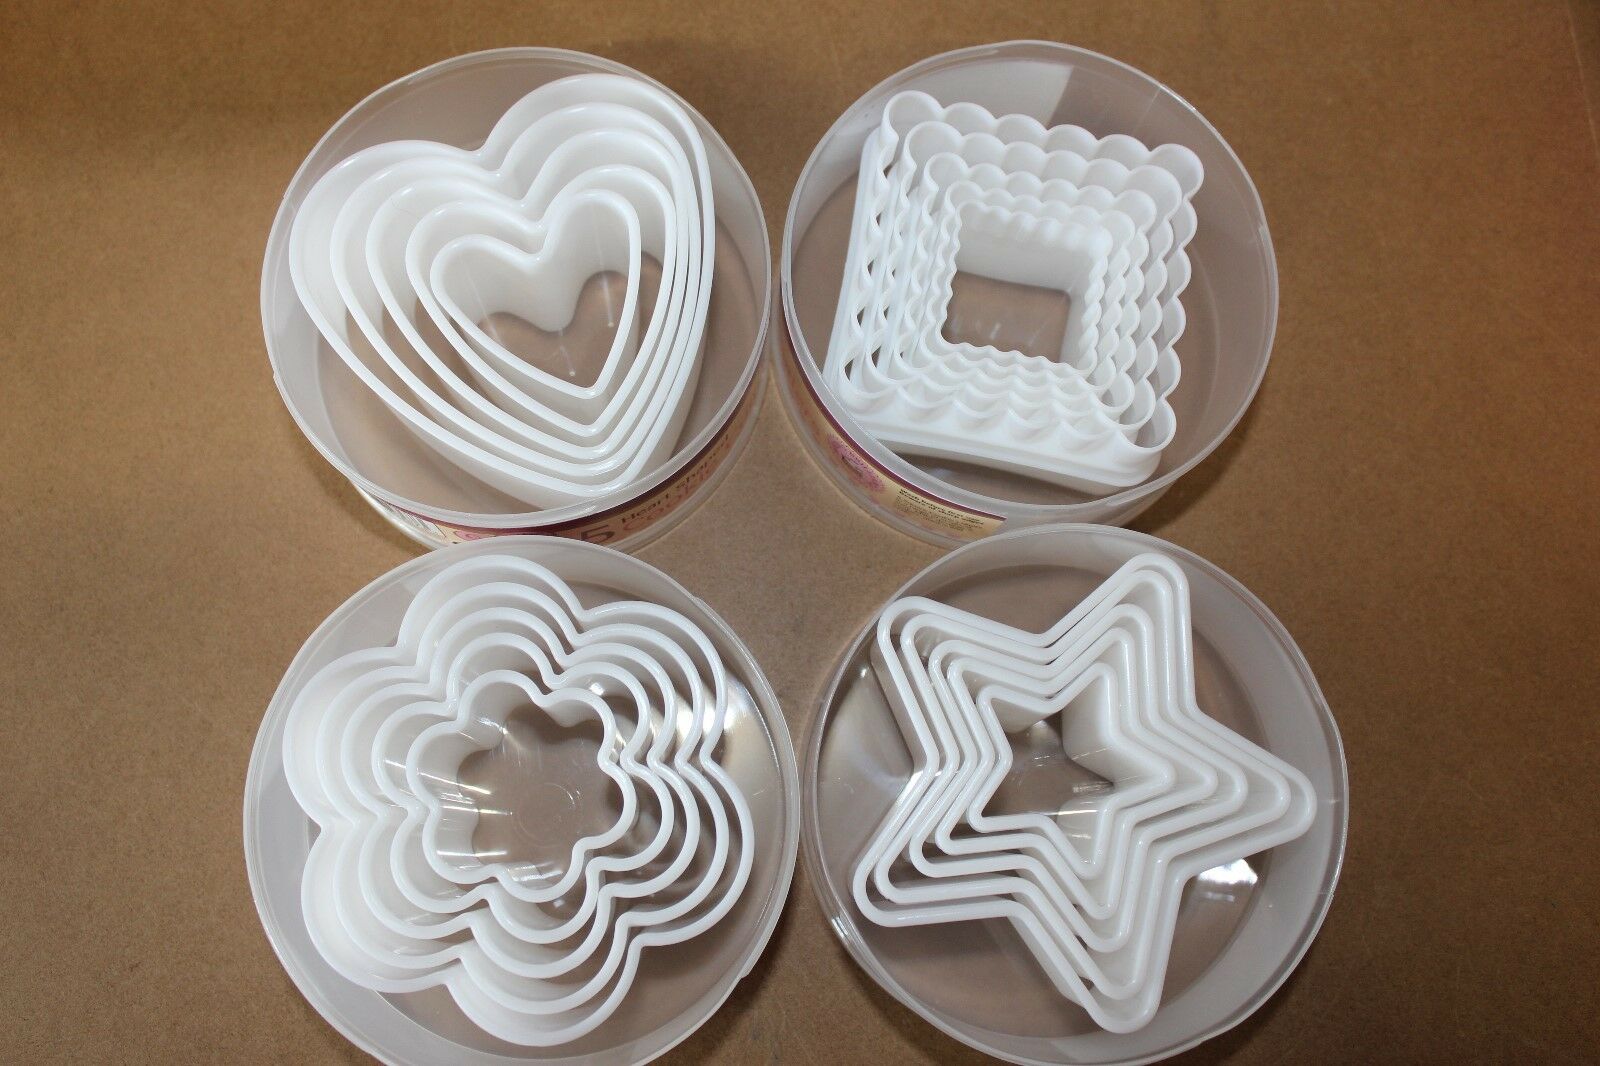 Set of 5 Cookie Cutters Biscuit Pastry Flower/Clouds Heart Square Star Box set